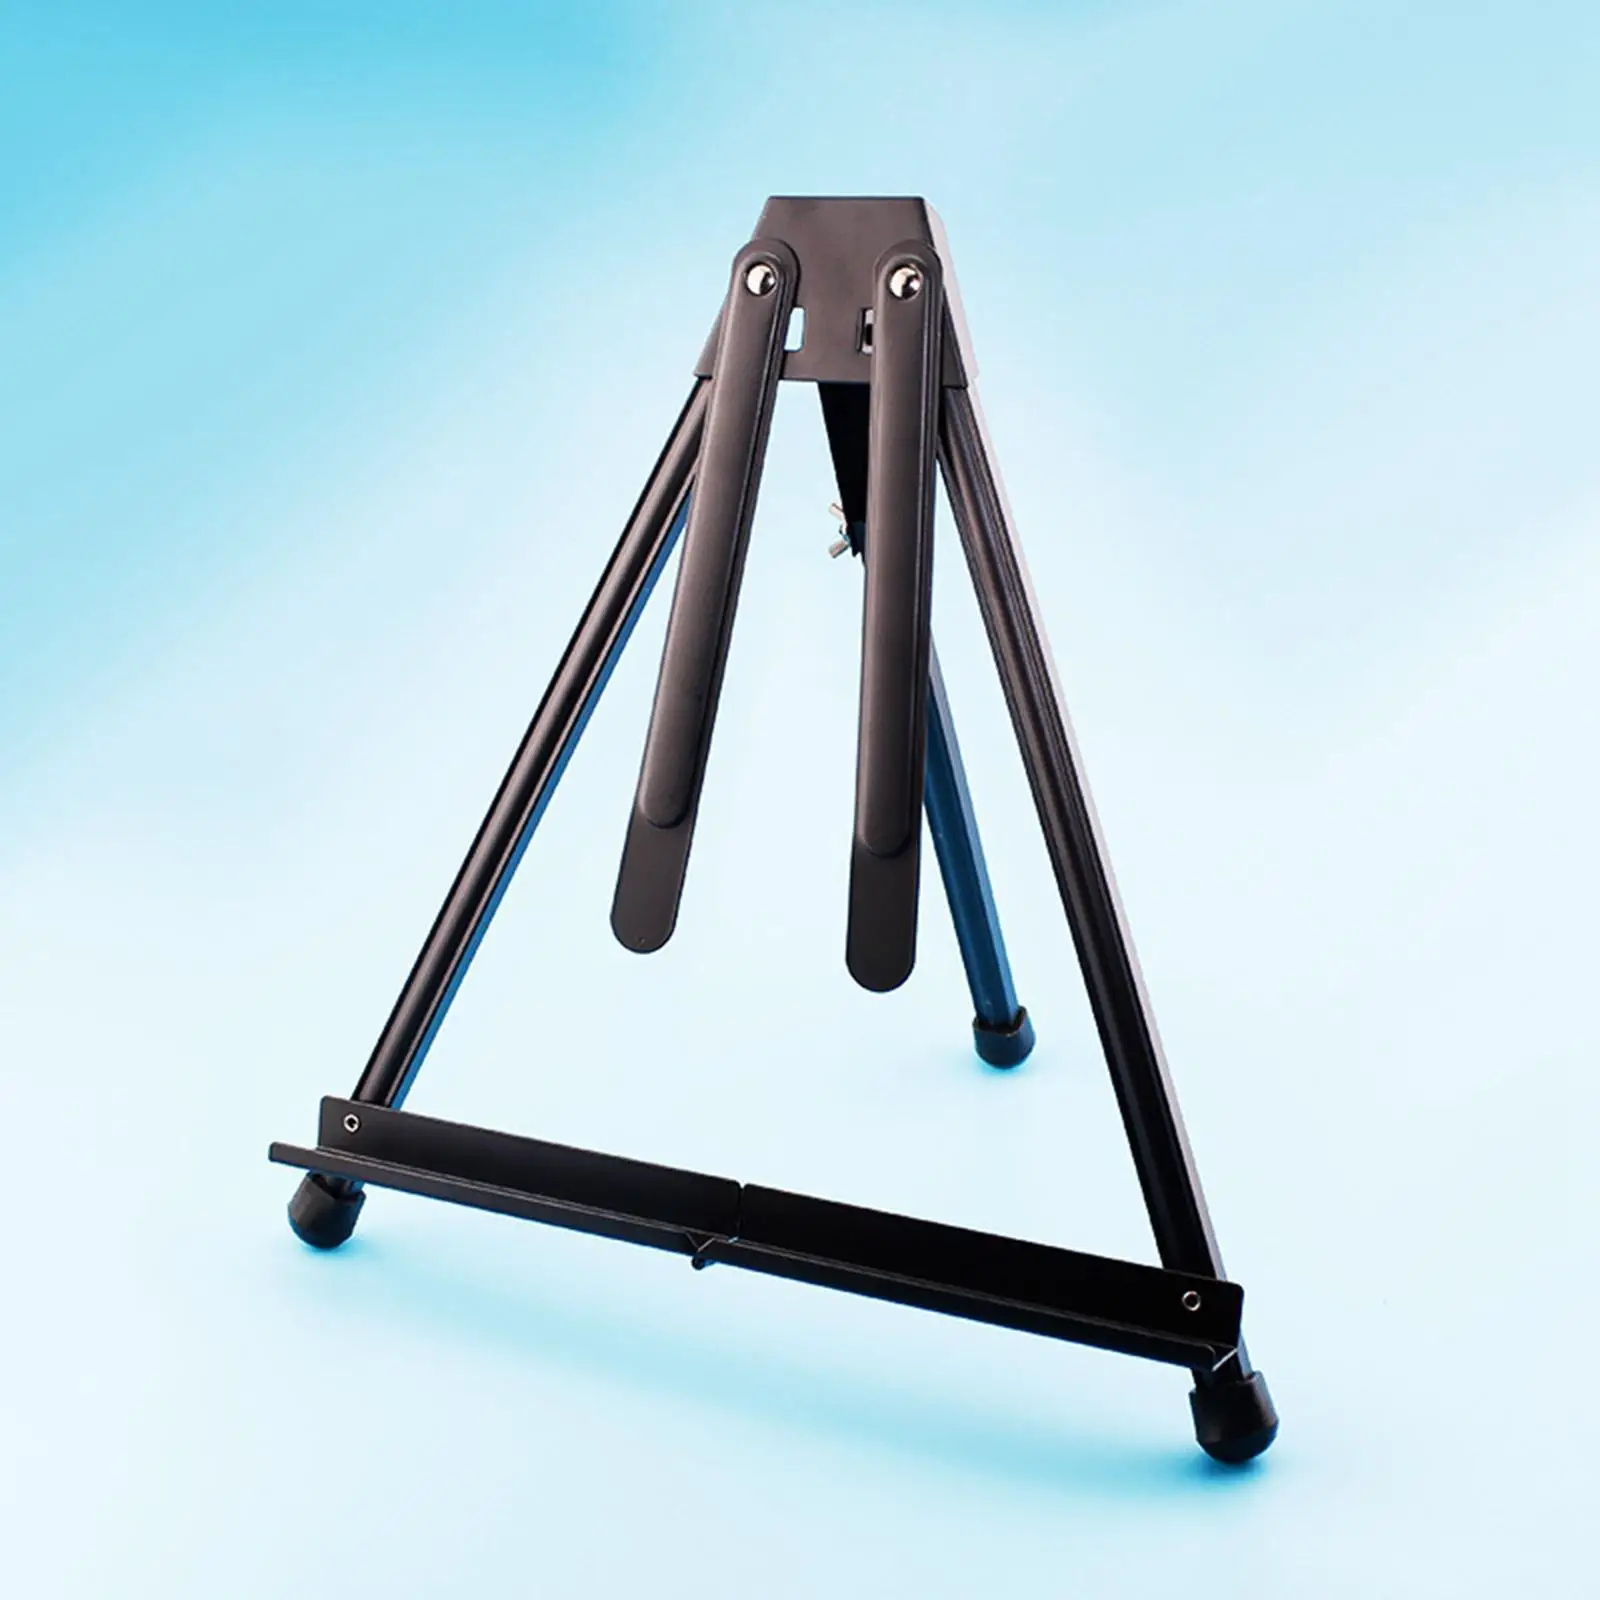 Tabletop Easel Stand Aluminum with Rotate Arm Wing Holder Tripod Display Easel for Birthday Party Photo Cemetery Displaying Art